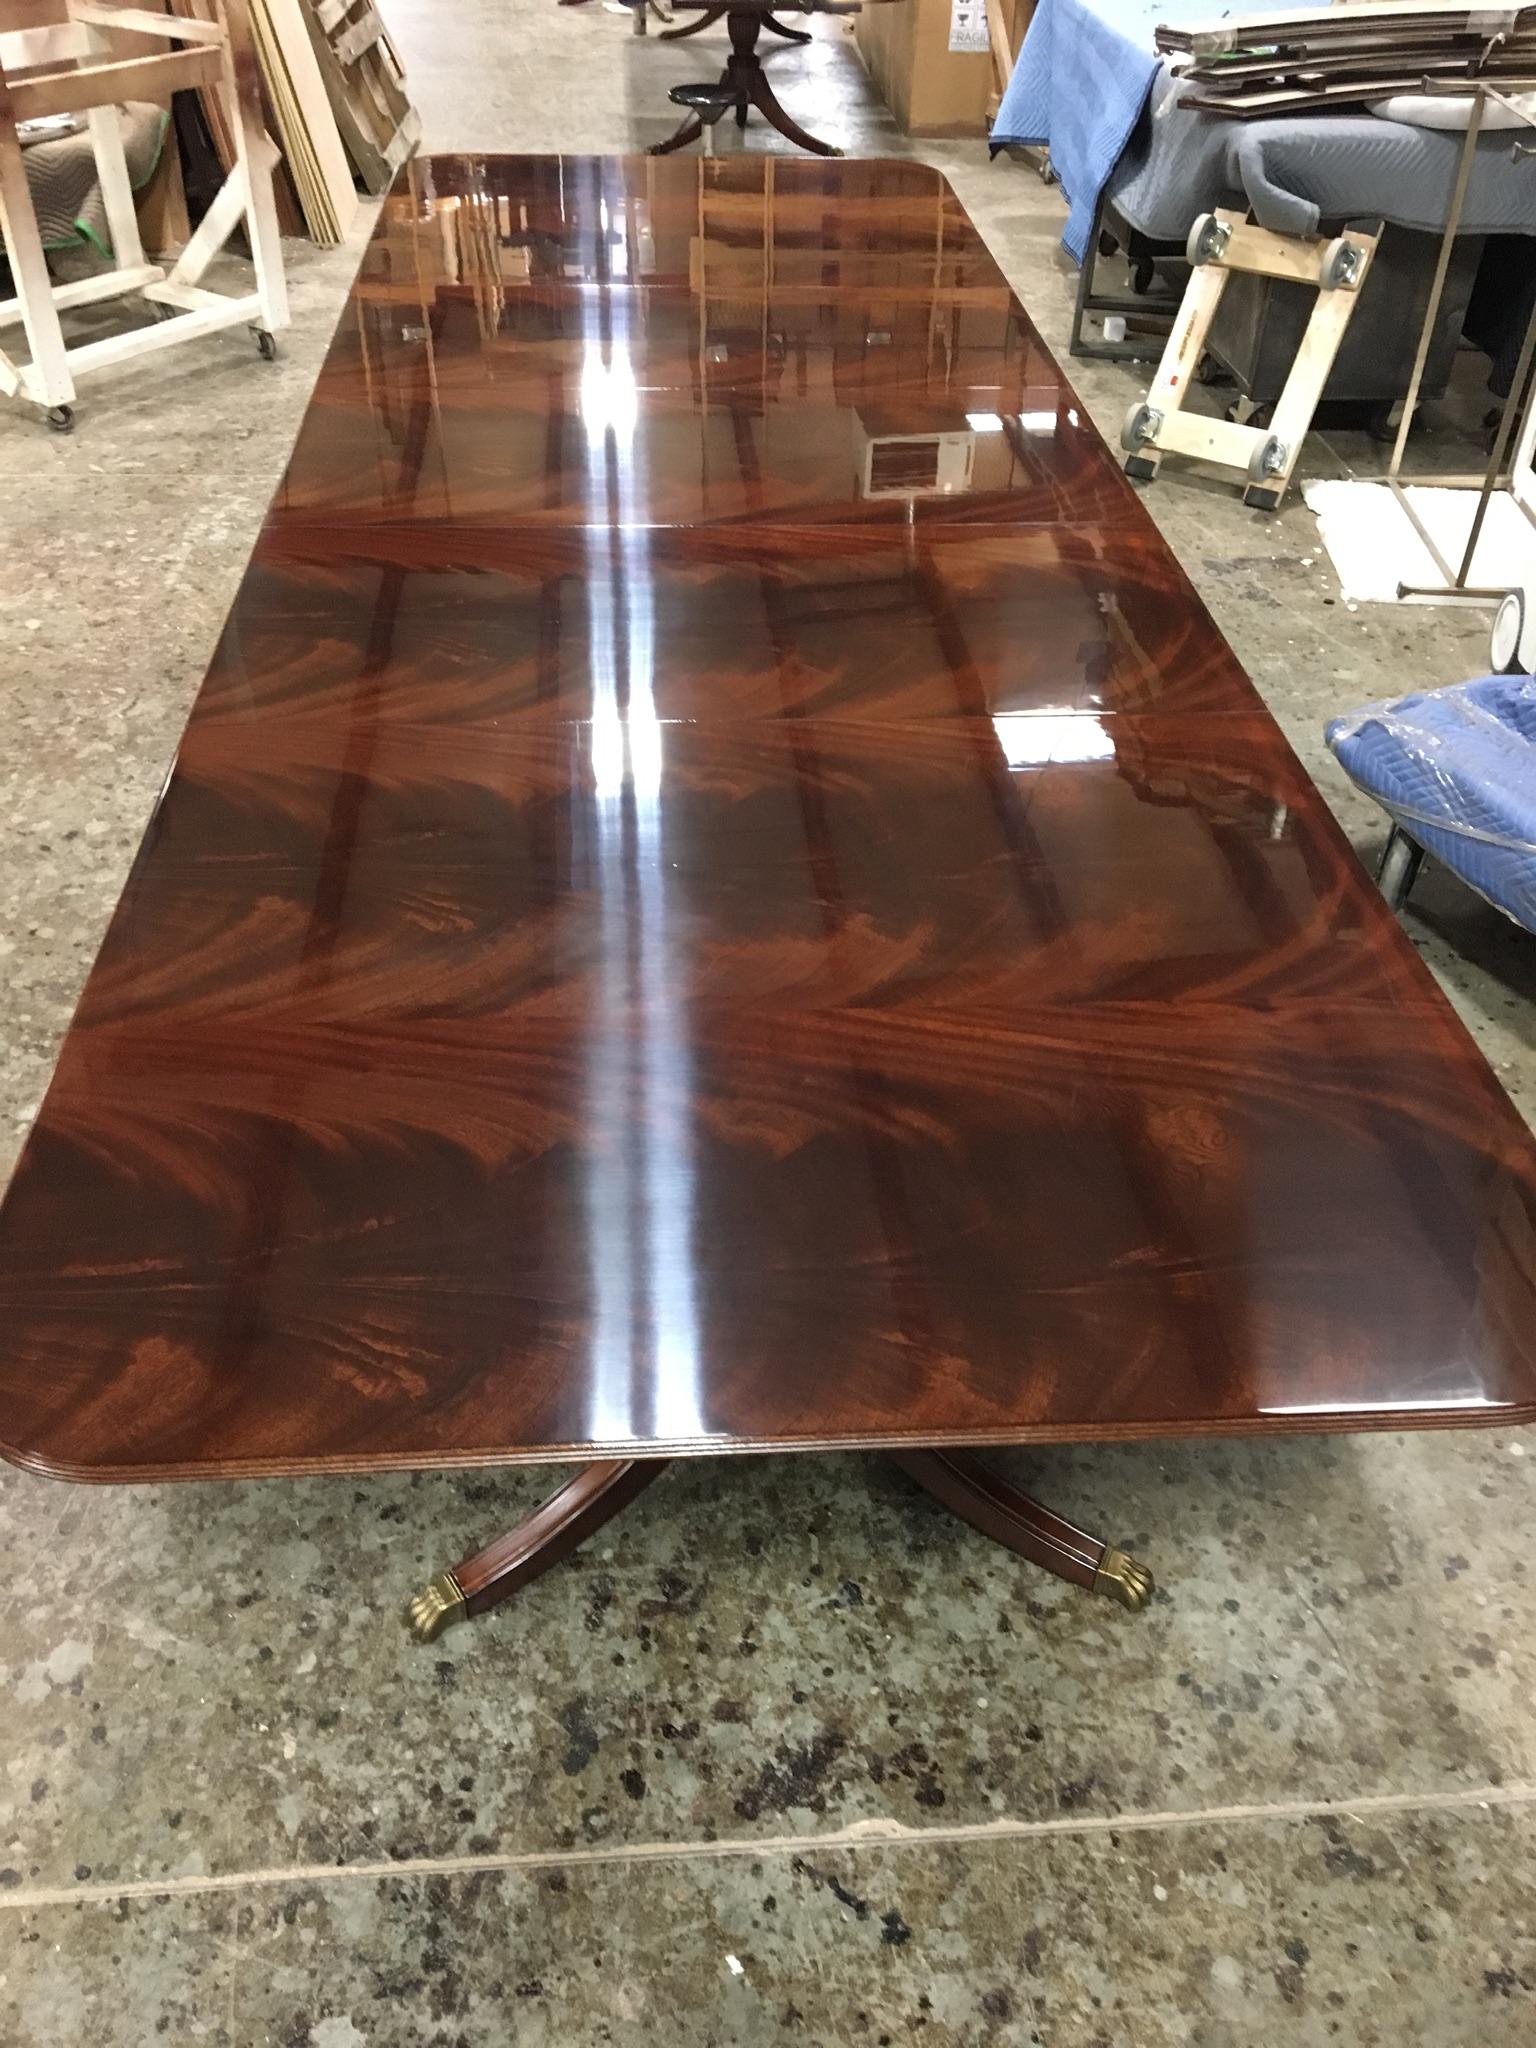 This is a made-to-order Large Traditional mahogany banquet/dining table made in the Leighton Hall shop. It is modeled after the understated swirly crotch mahogany tables made in the 1800s and early 1900s. It features a field of slip-matched swirly